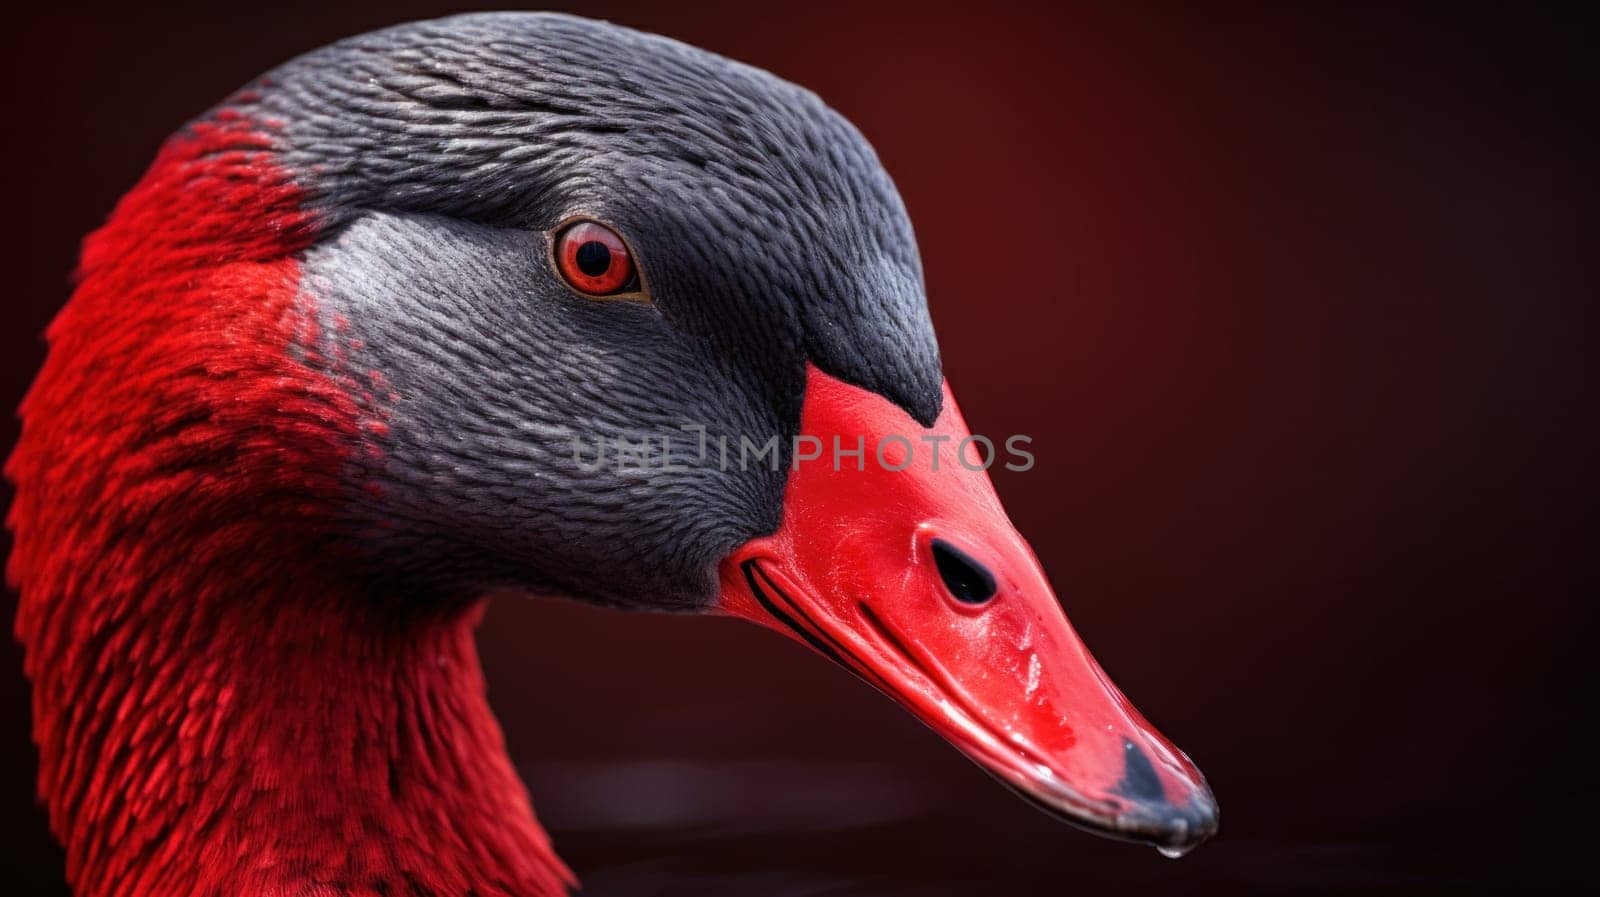 A close up of a red and black bird with grey beak